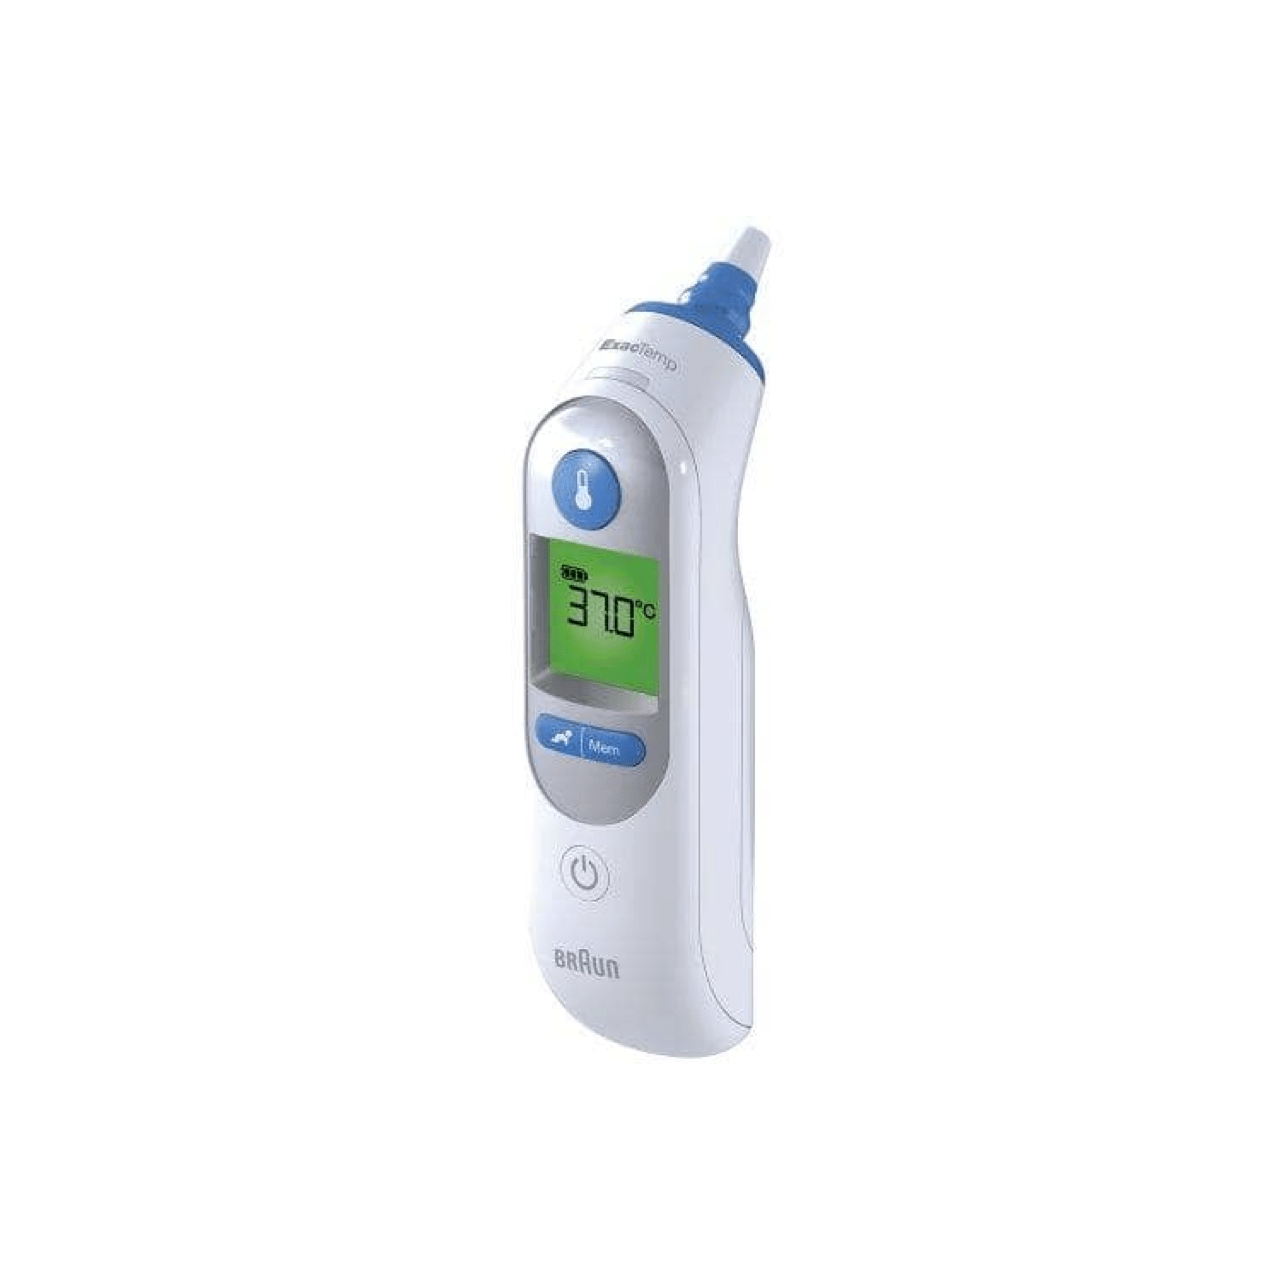 Braun ThermoScan 7 Ear Thermometer – Abytoys